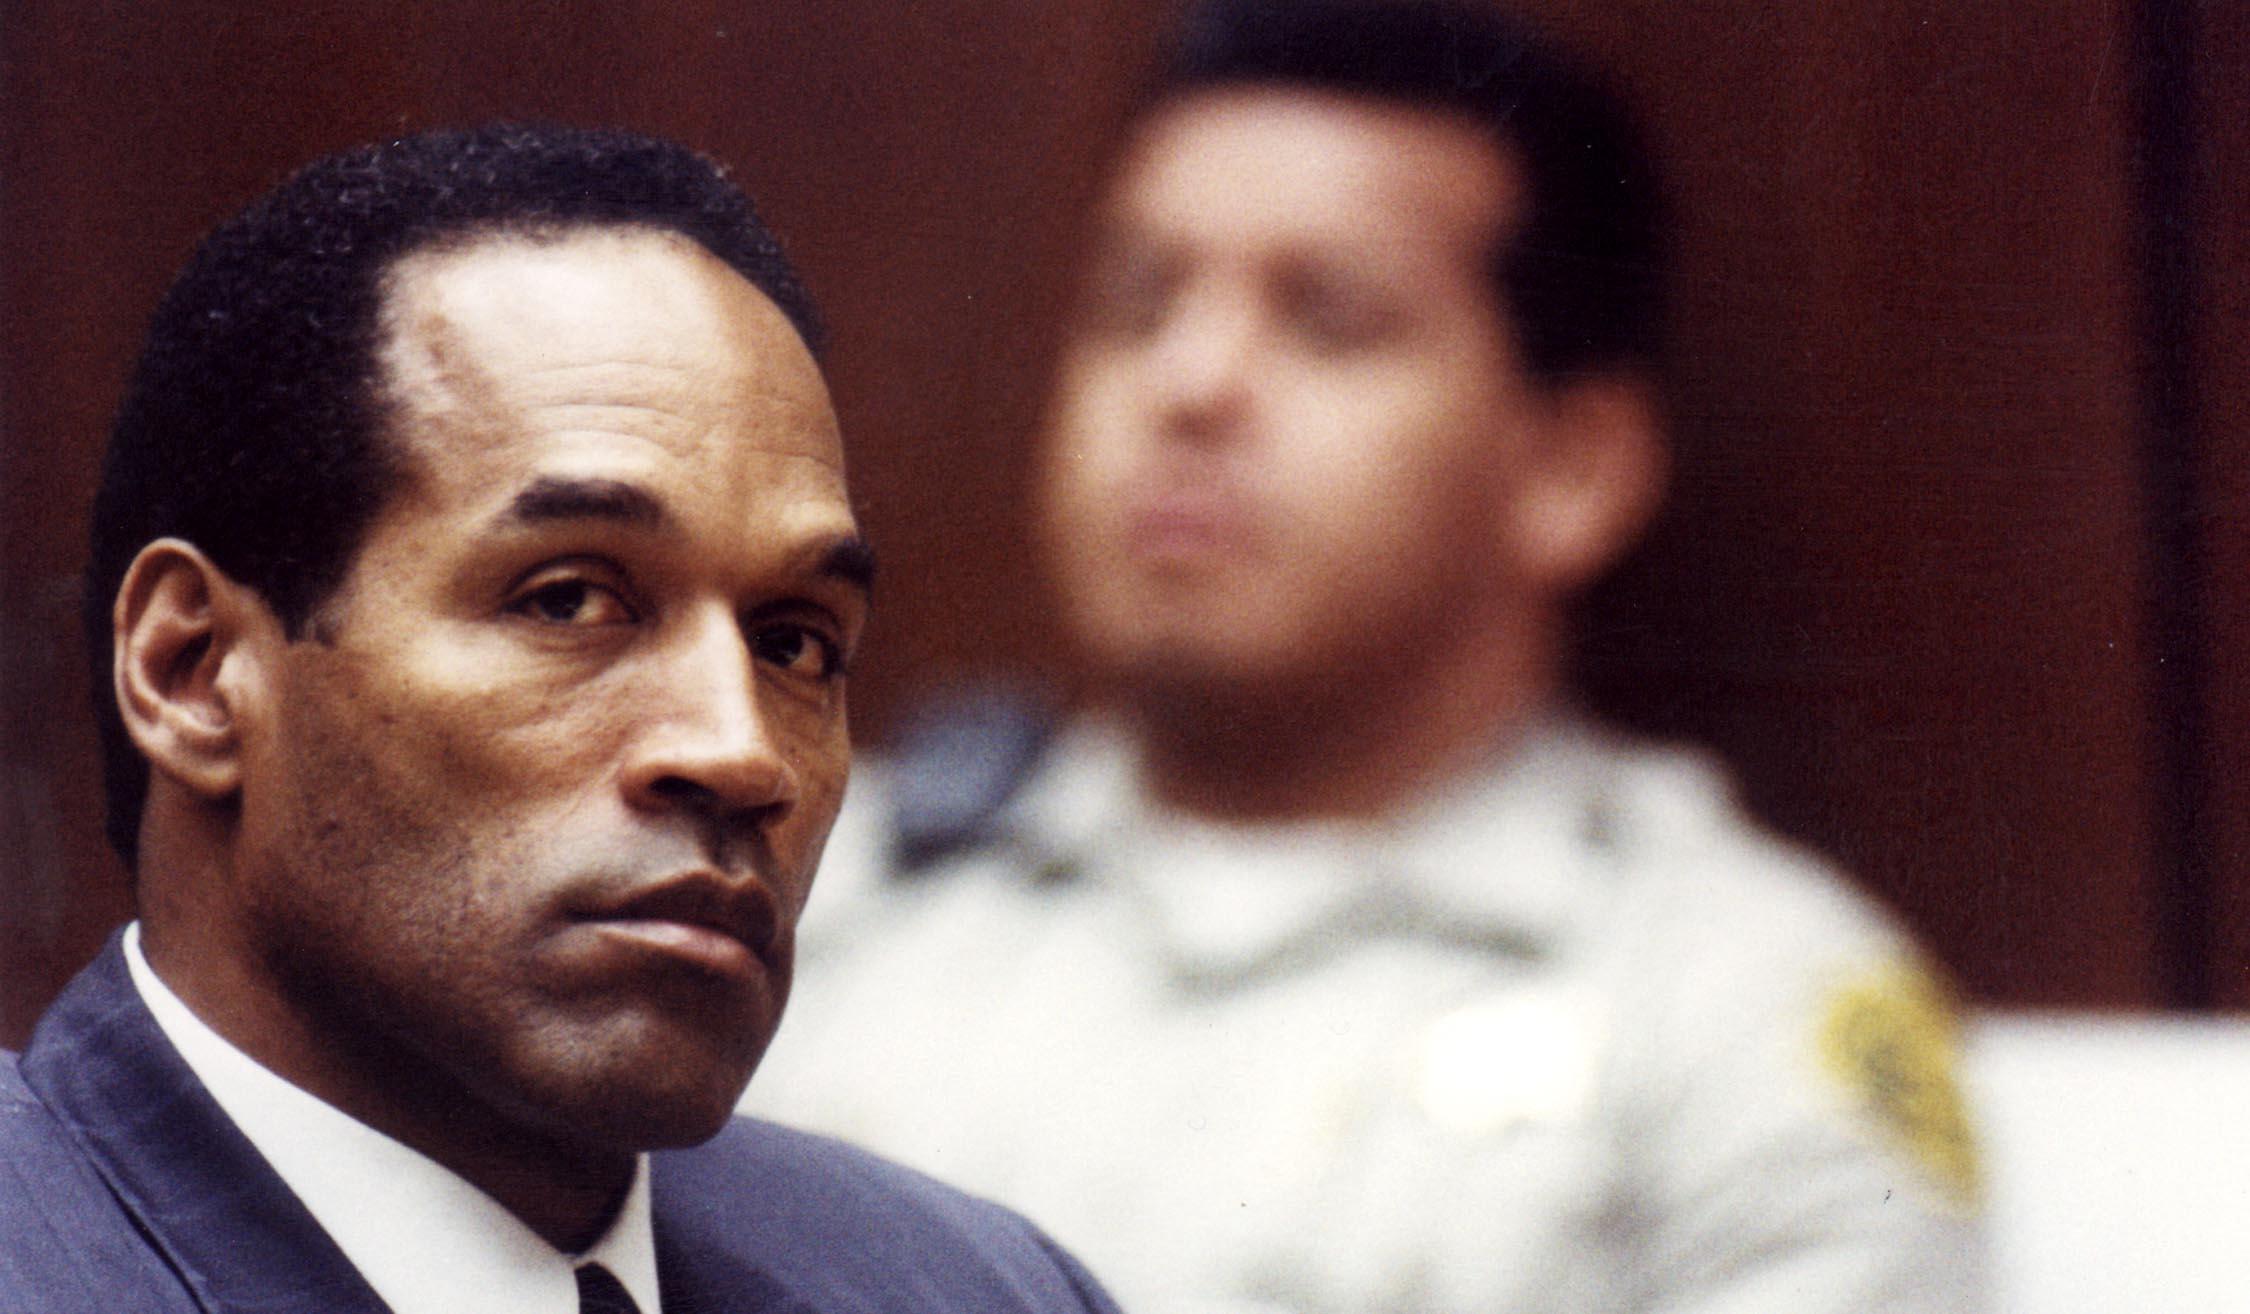 O.J. Simpson in courtroom